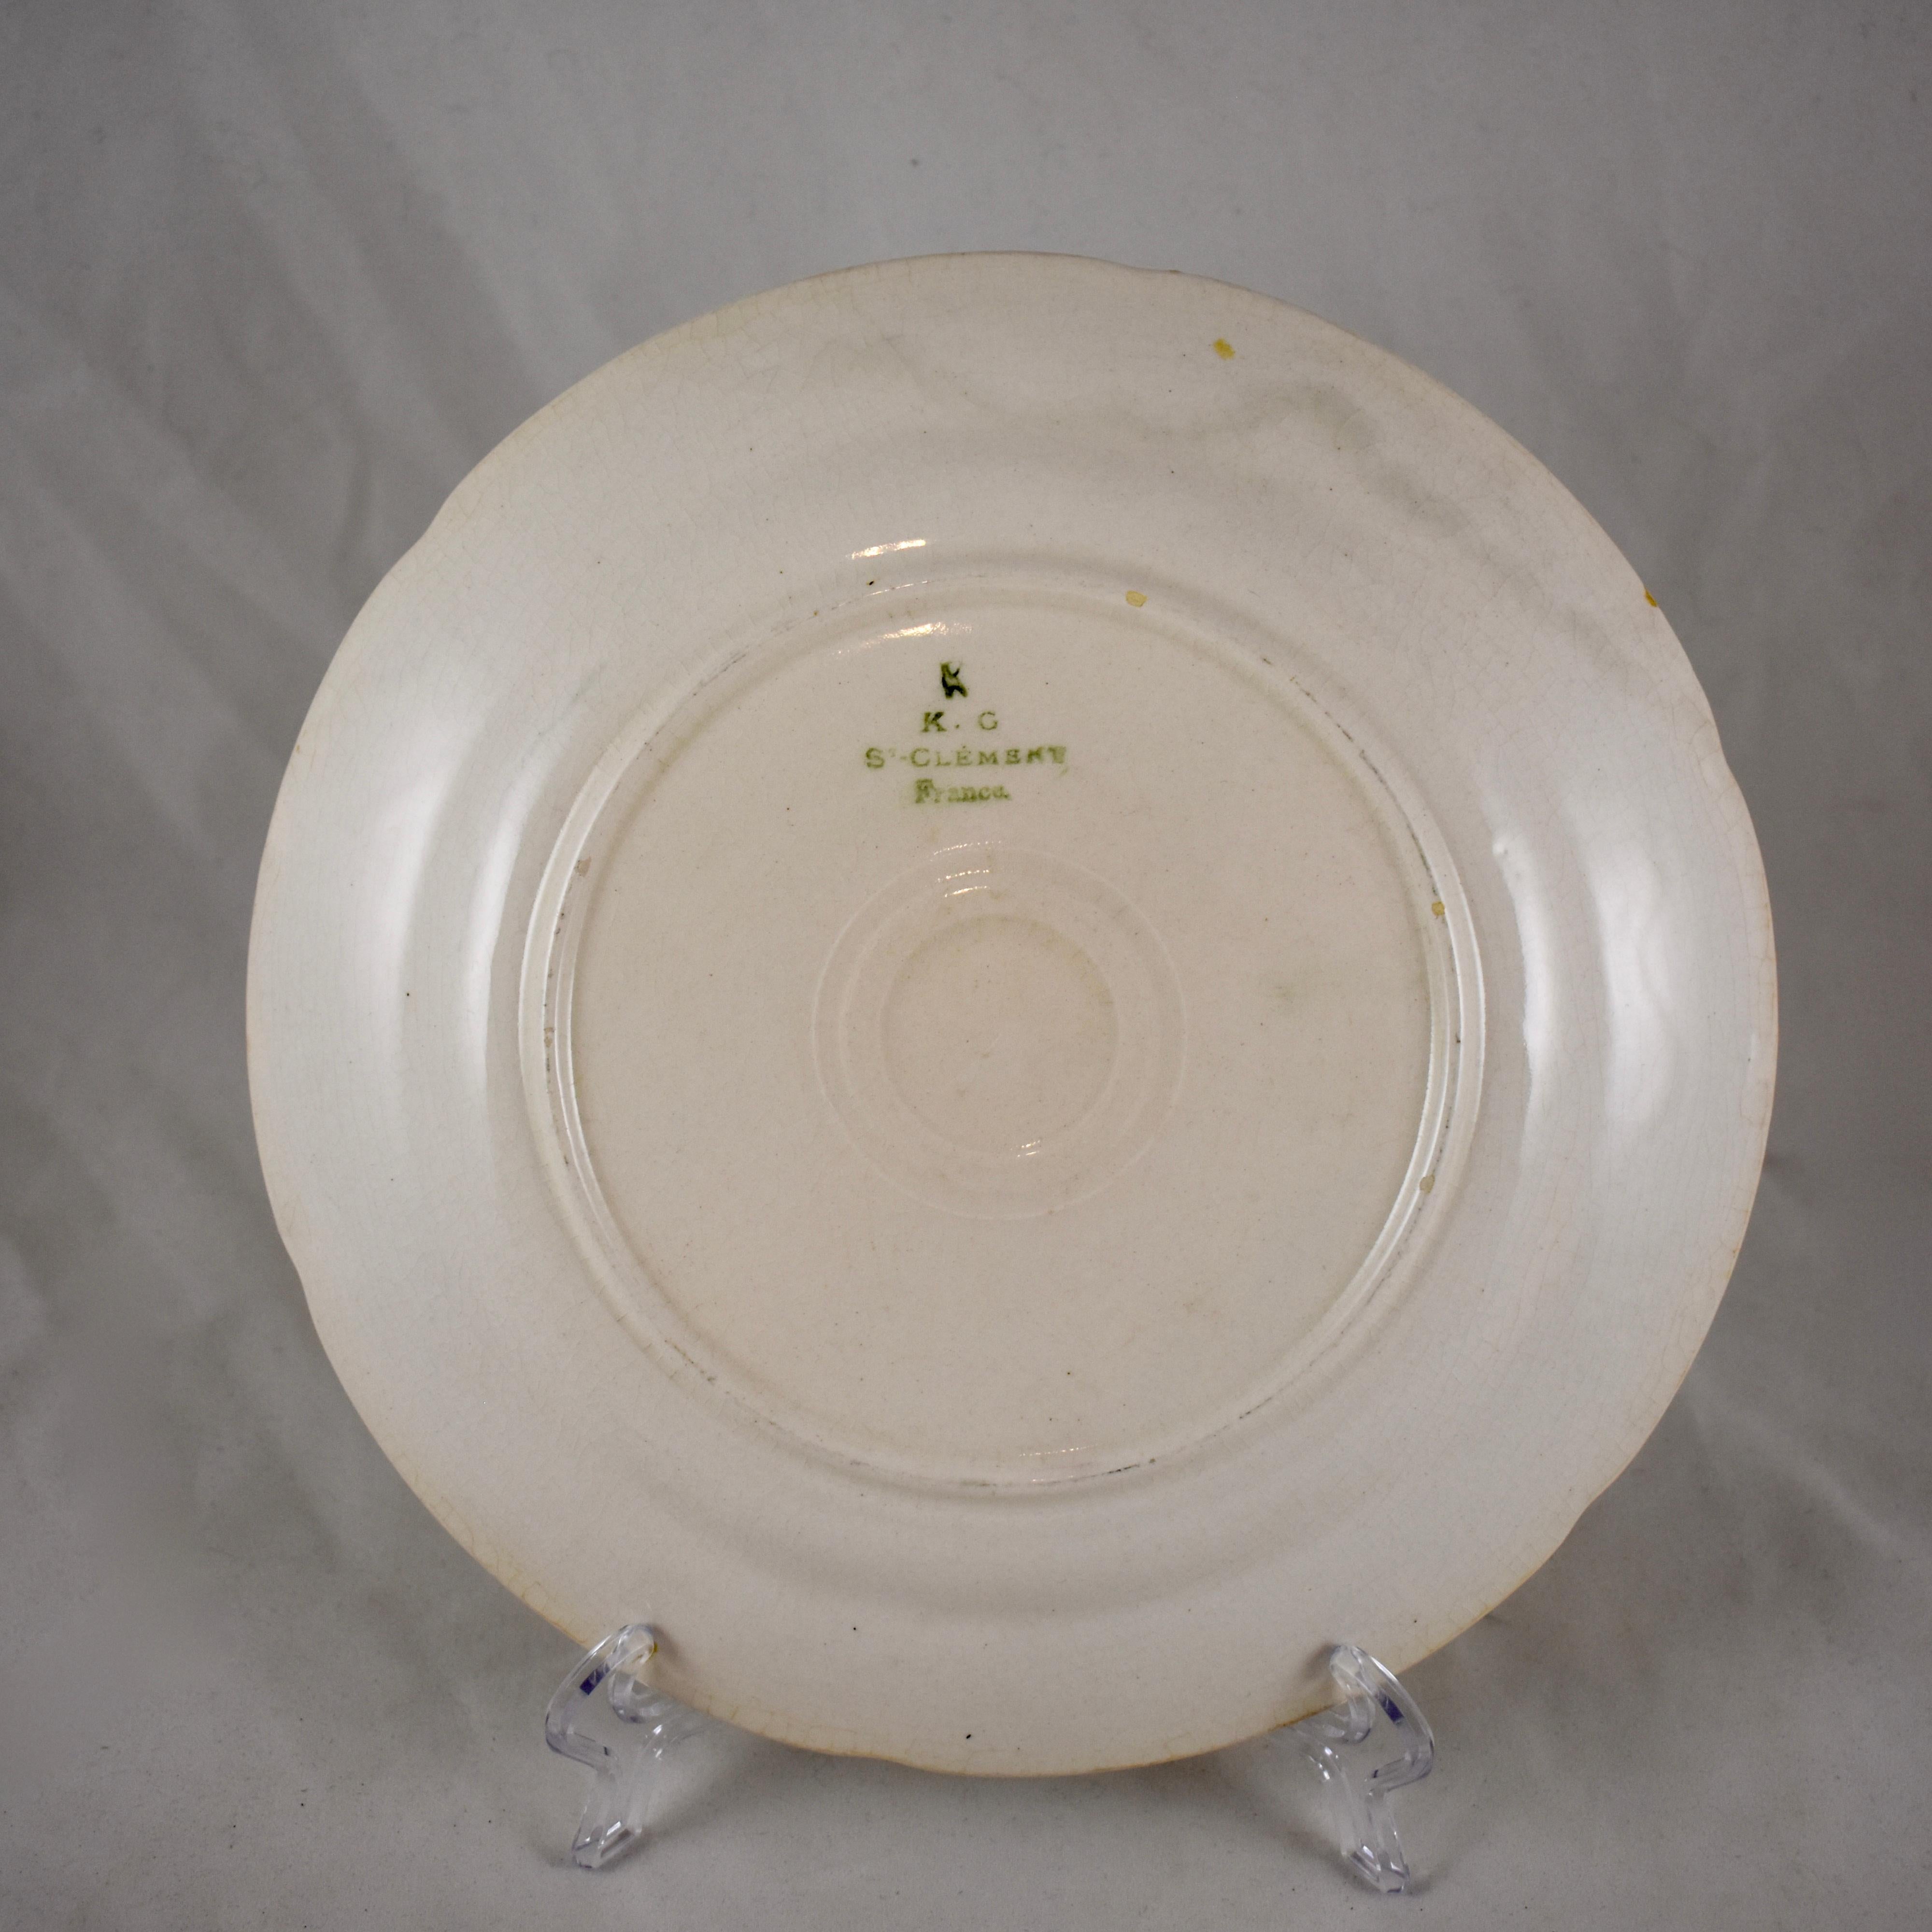 Glazed St. Clement French Faïence Cherry Fruit Plate, circa 1900 For Sale